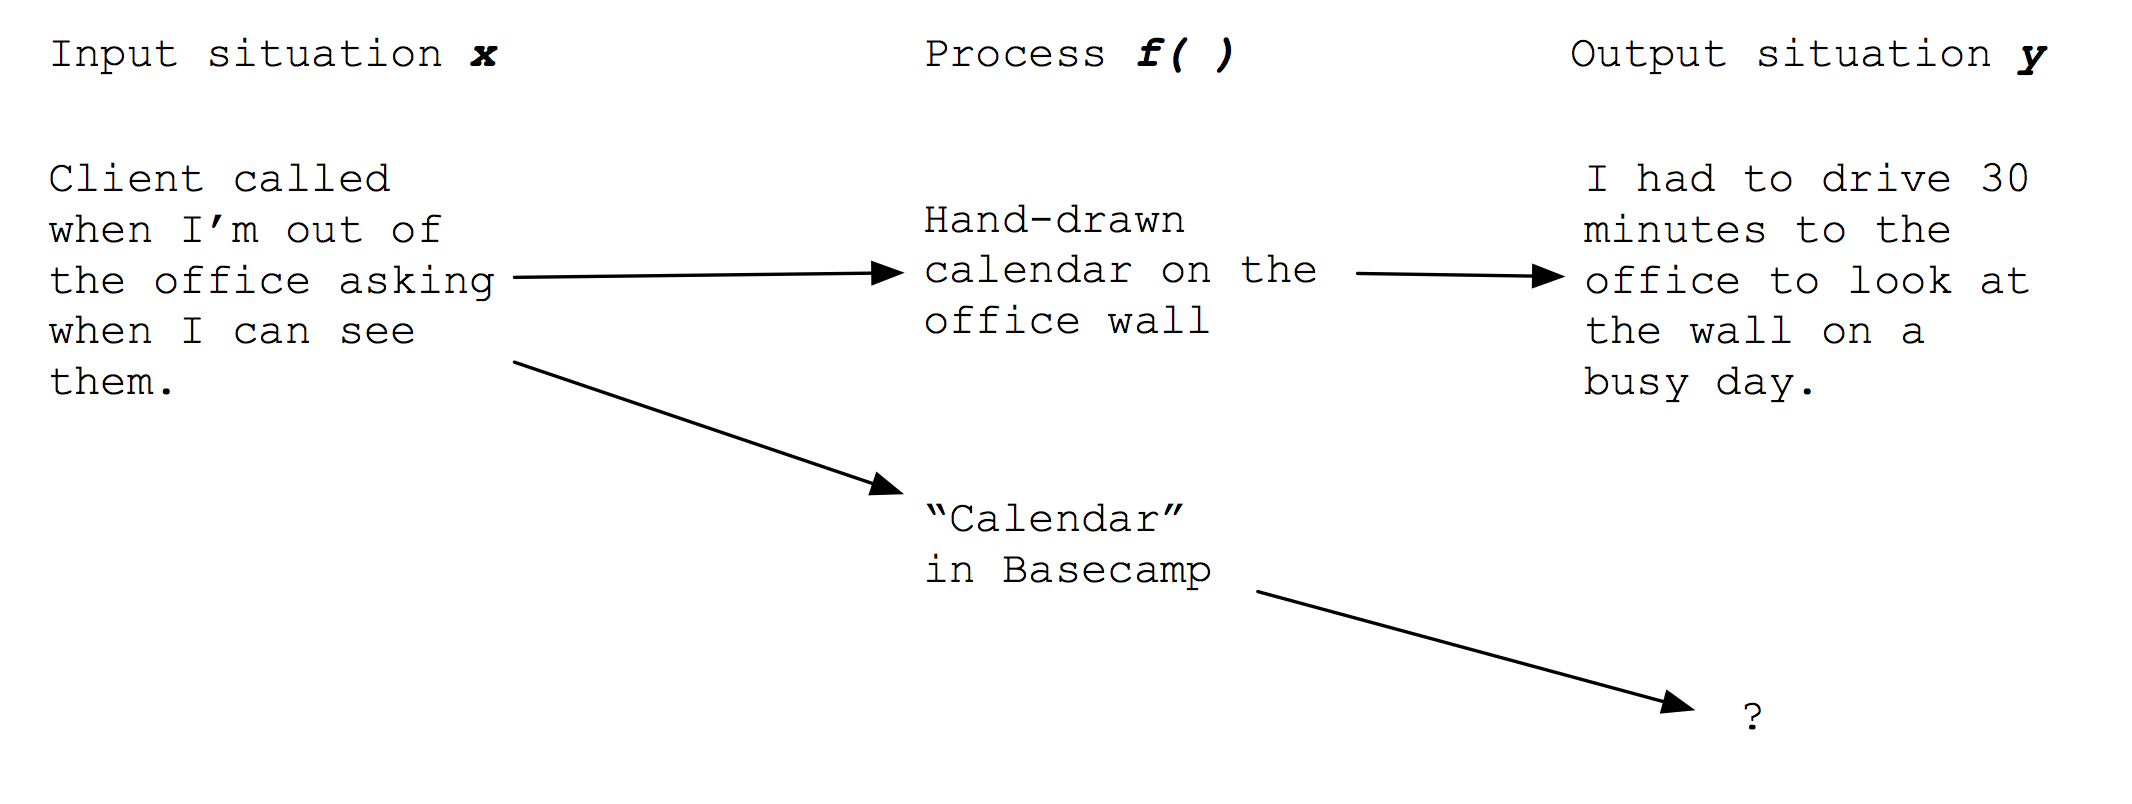 Function they currently use for calendar with circumstances